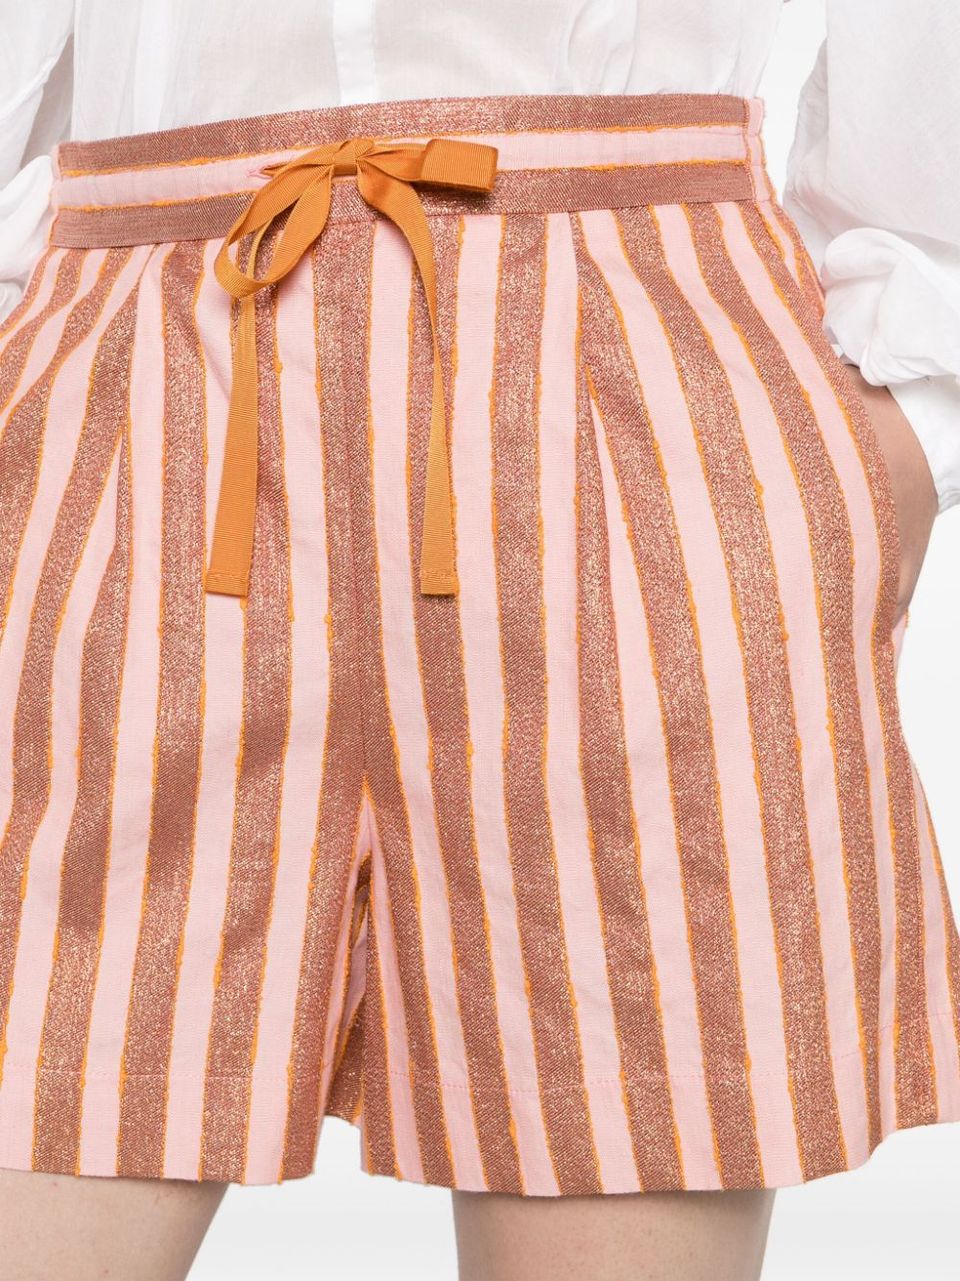 Cotton and linen striped shorts with lurex